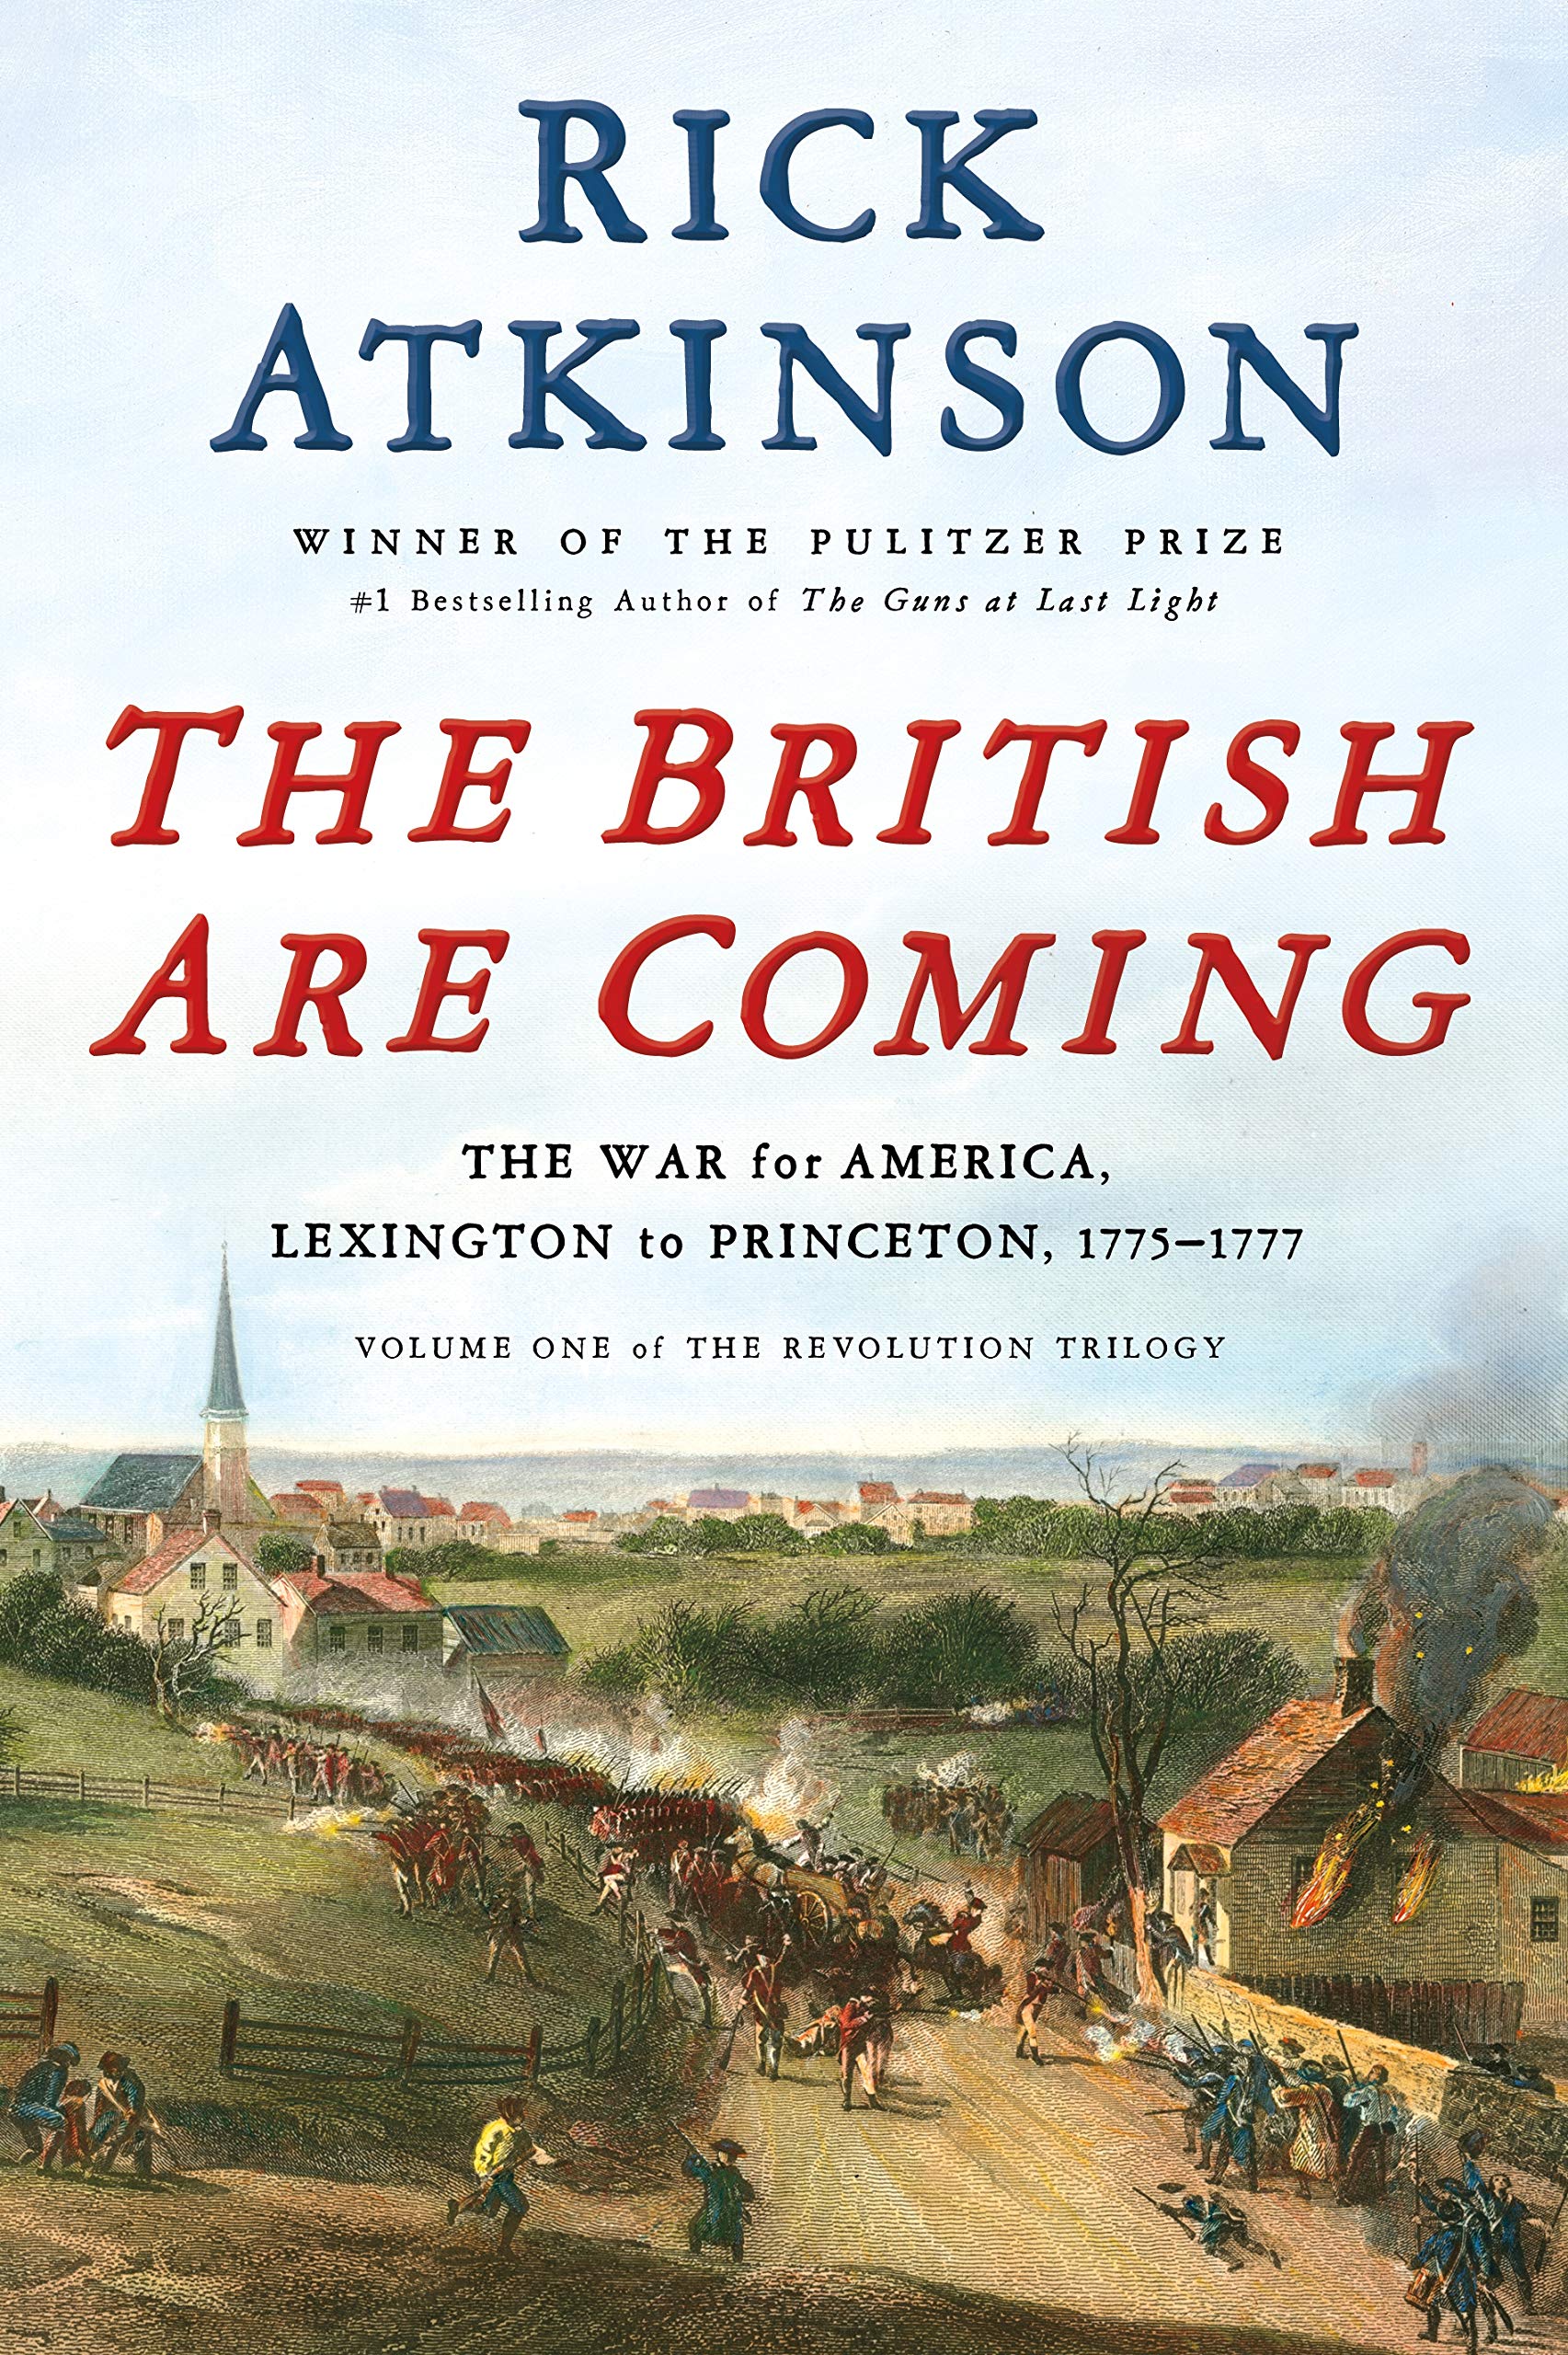 Image for "The British Are Coming"